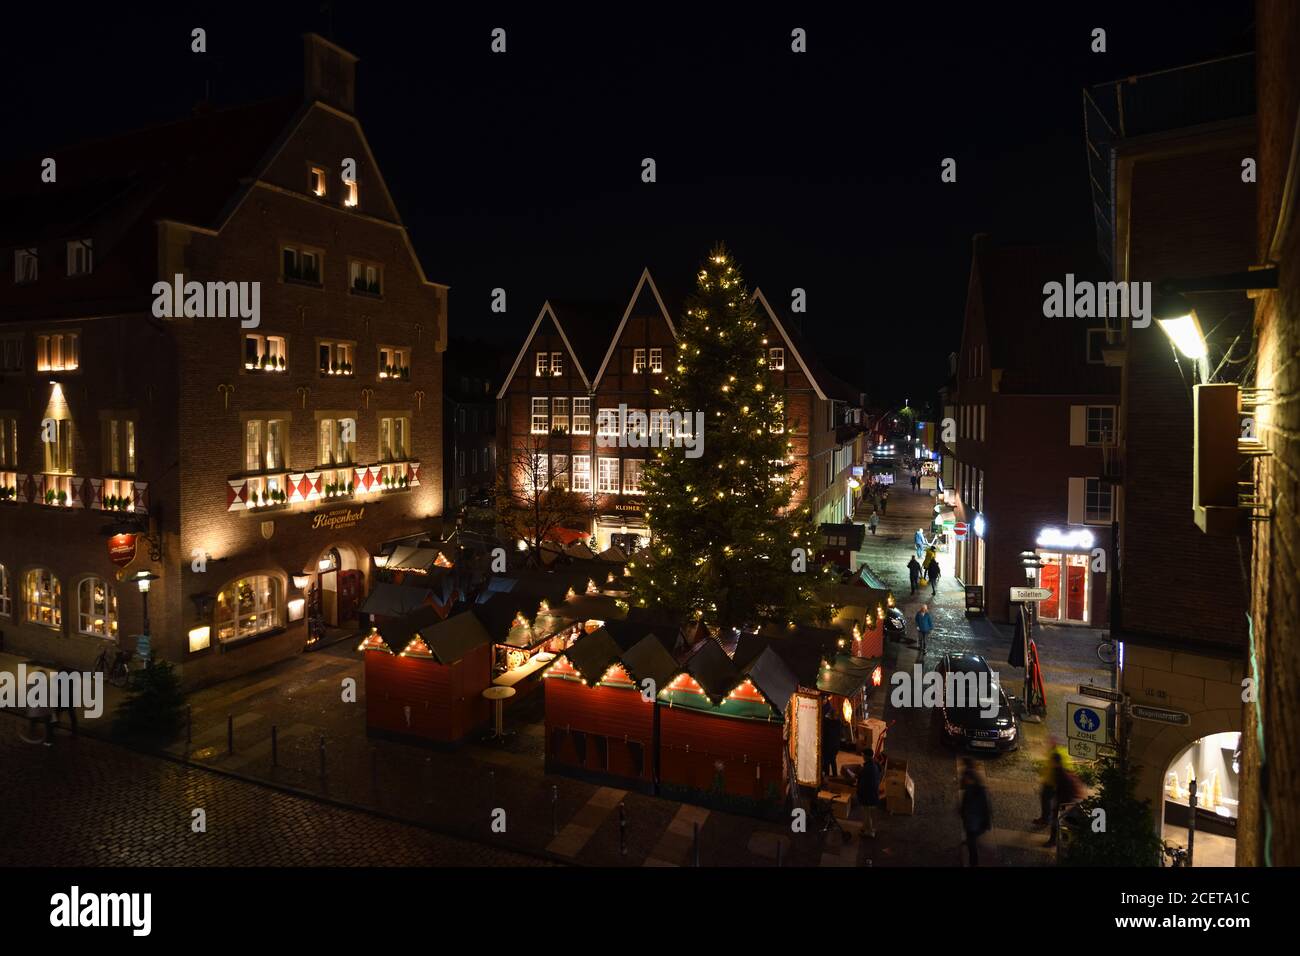 Muenster, Kiepenkerl square, christmas market in the old town, city center of Münster, North Rhine Westphalia, Germany, Europe. Stock Photo